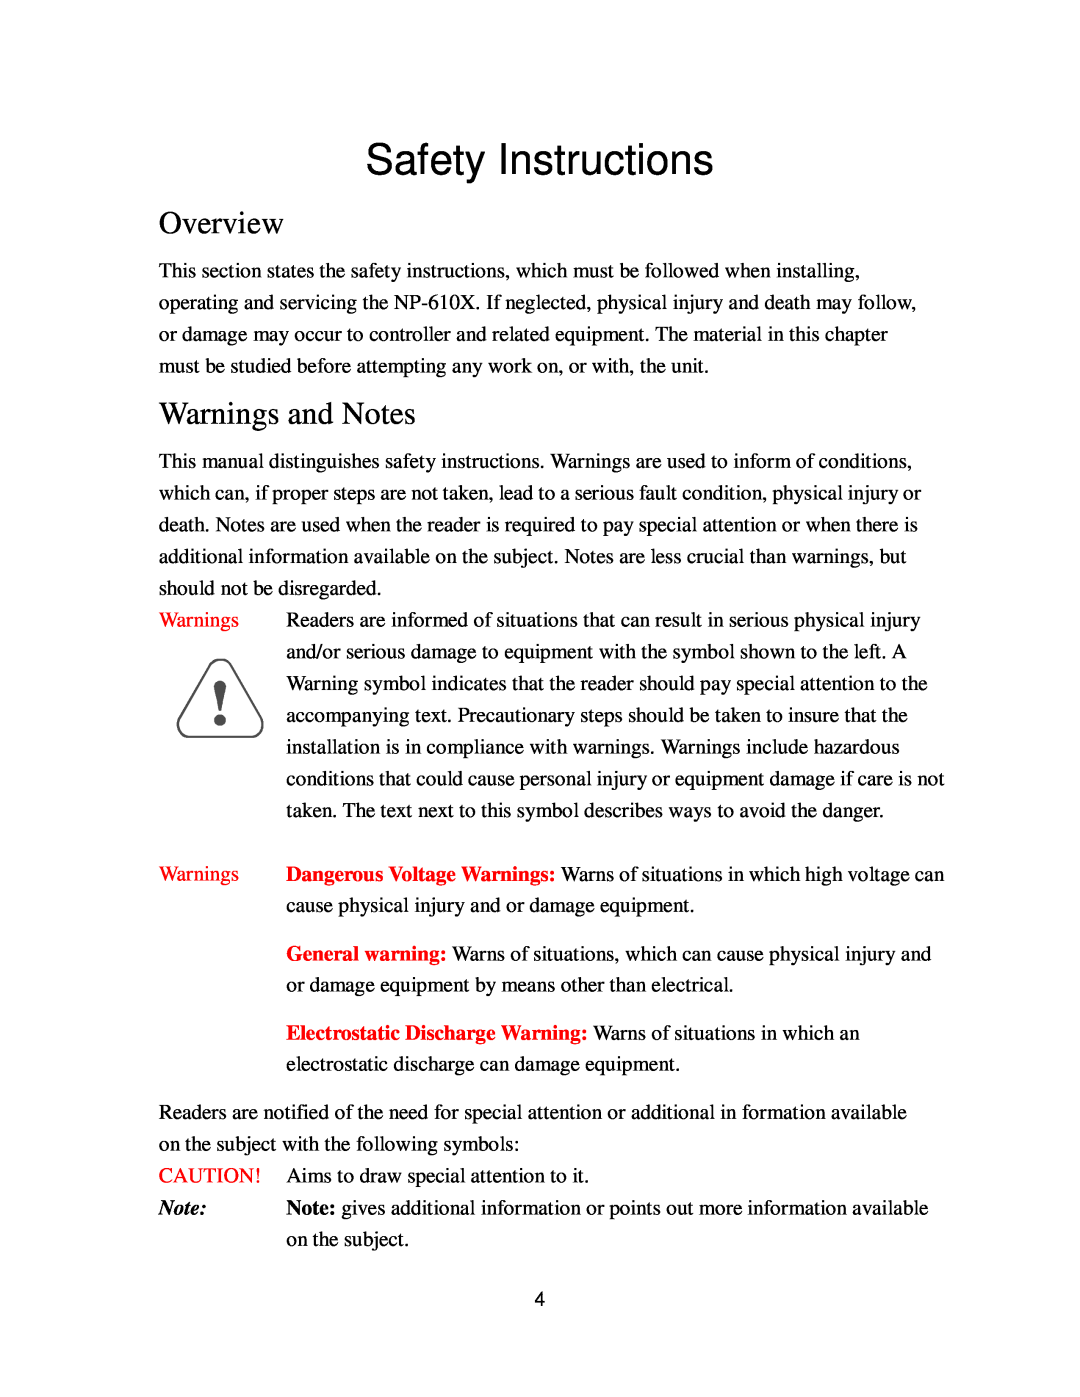 Nextar NP-610X user manual Safety Instructions, Overview, Warnings and Notes 